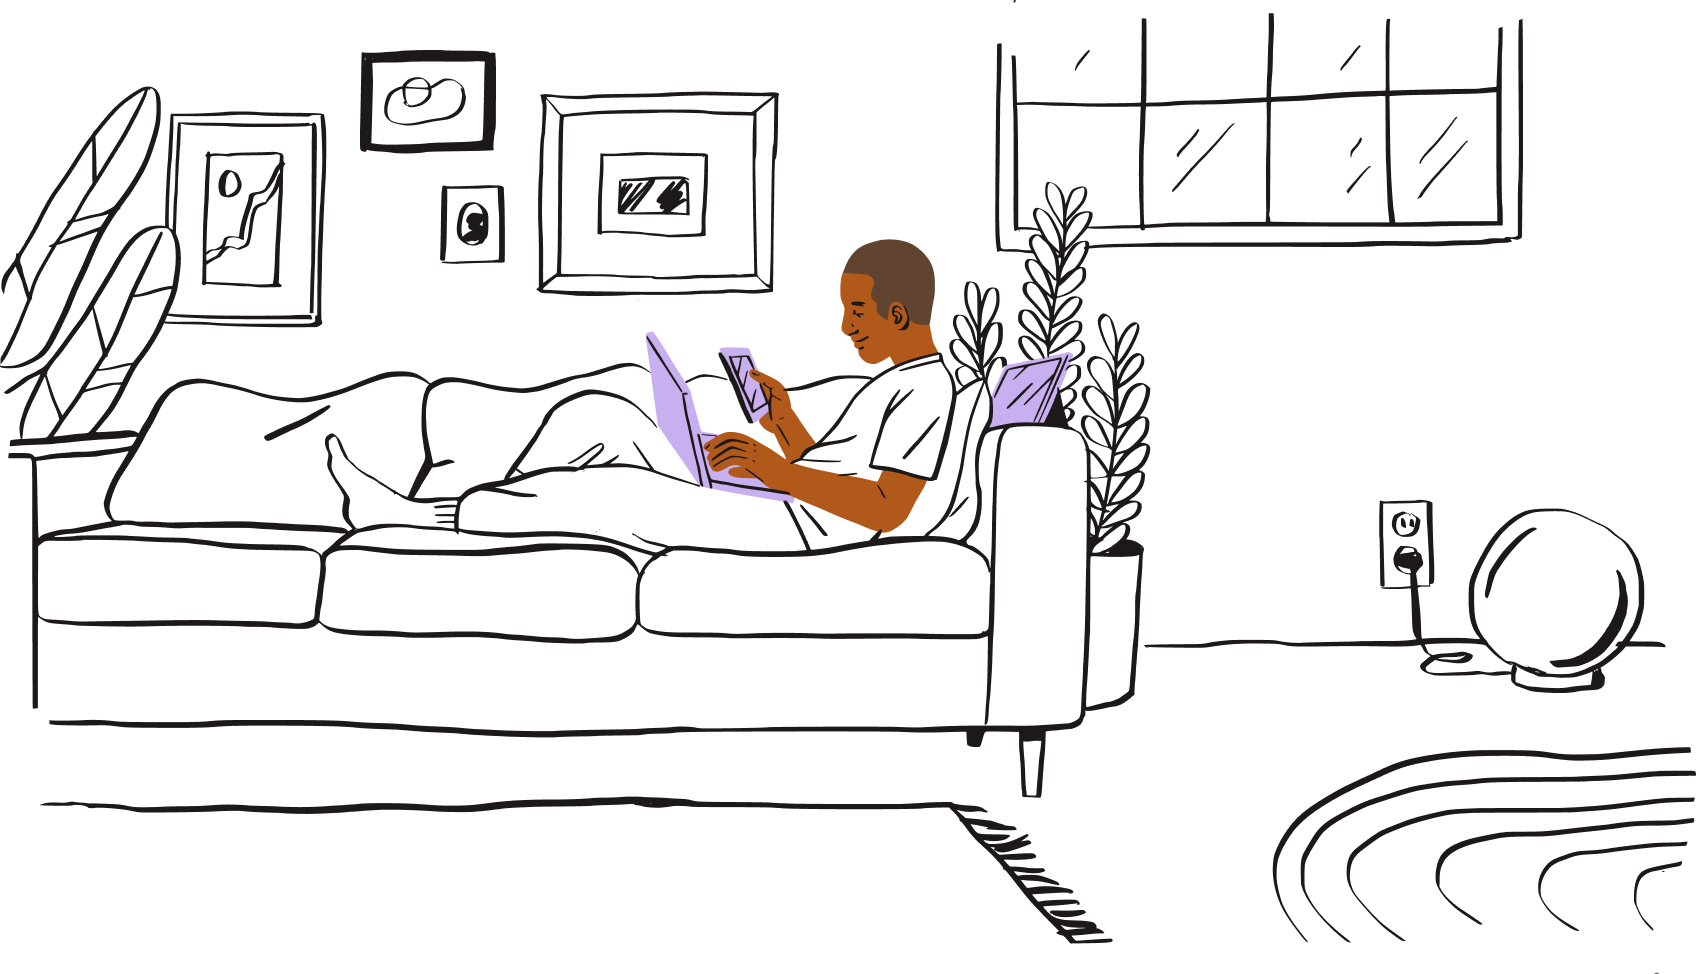 Illustration of a person using multiple devices at home